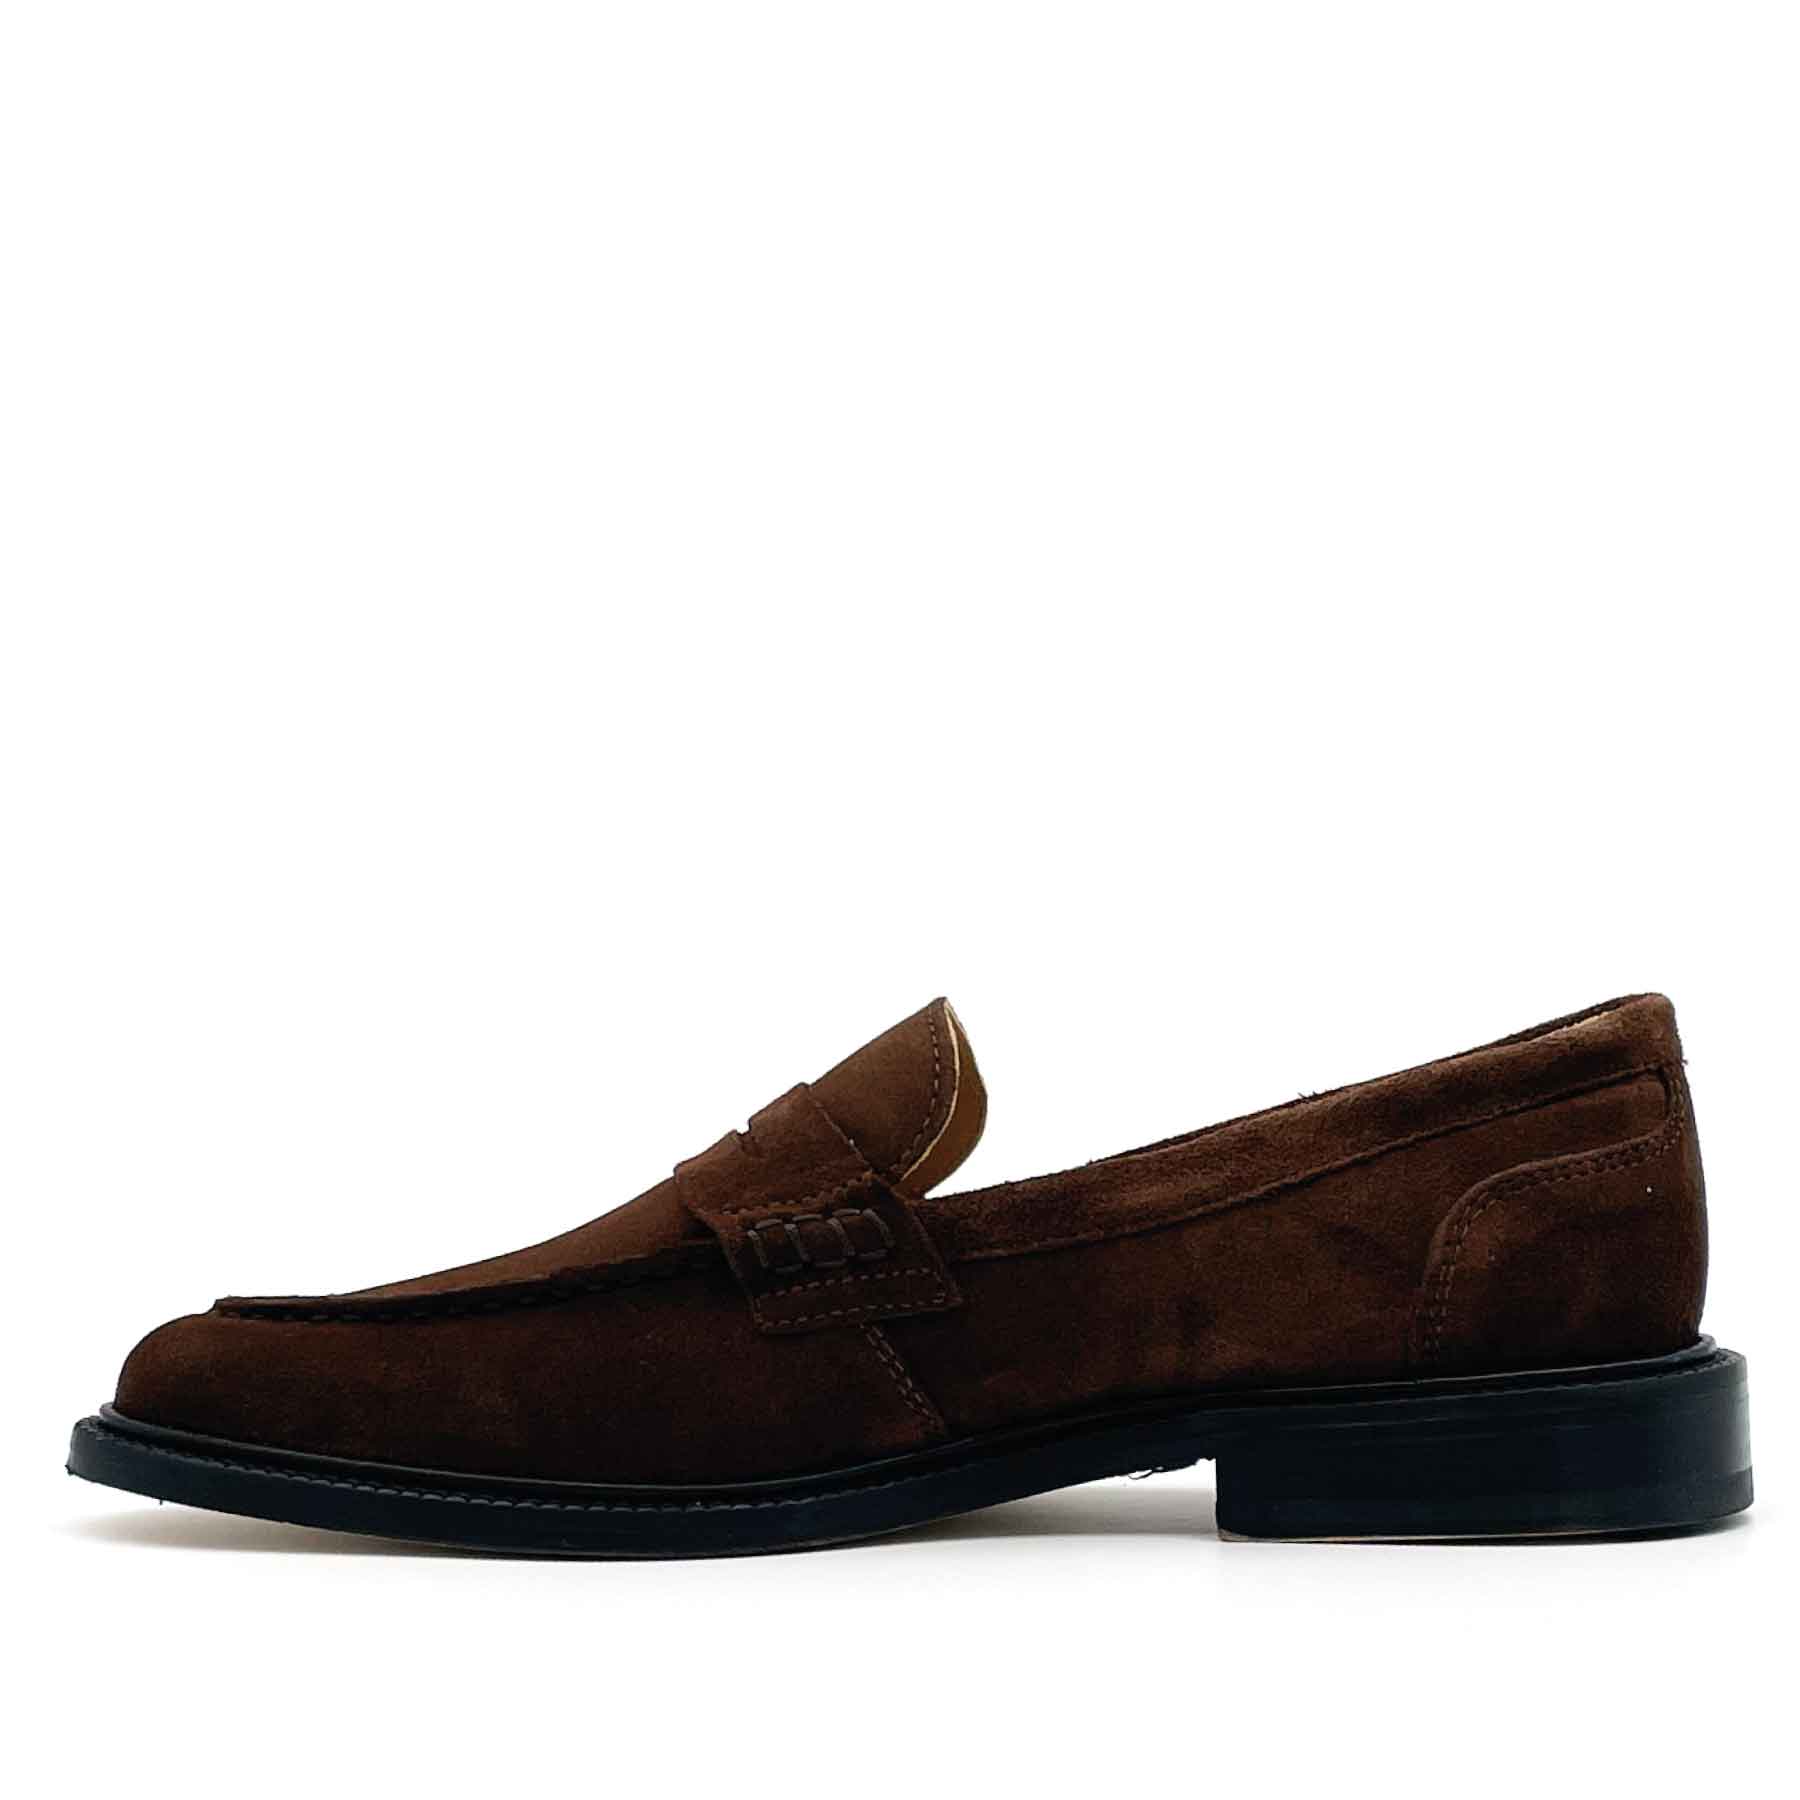 Townee Penny Loafer Light Brown Suede